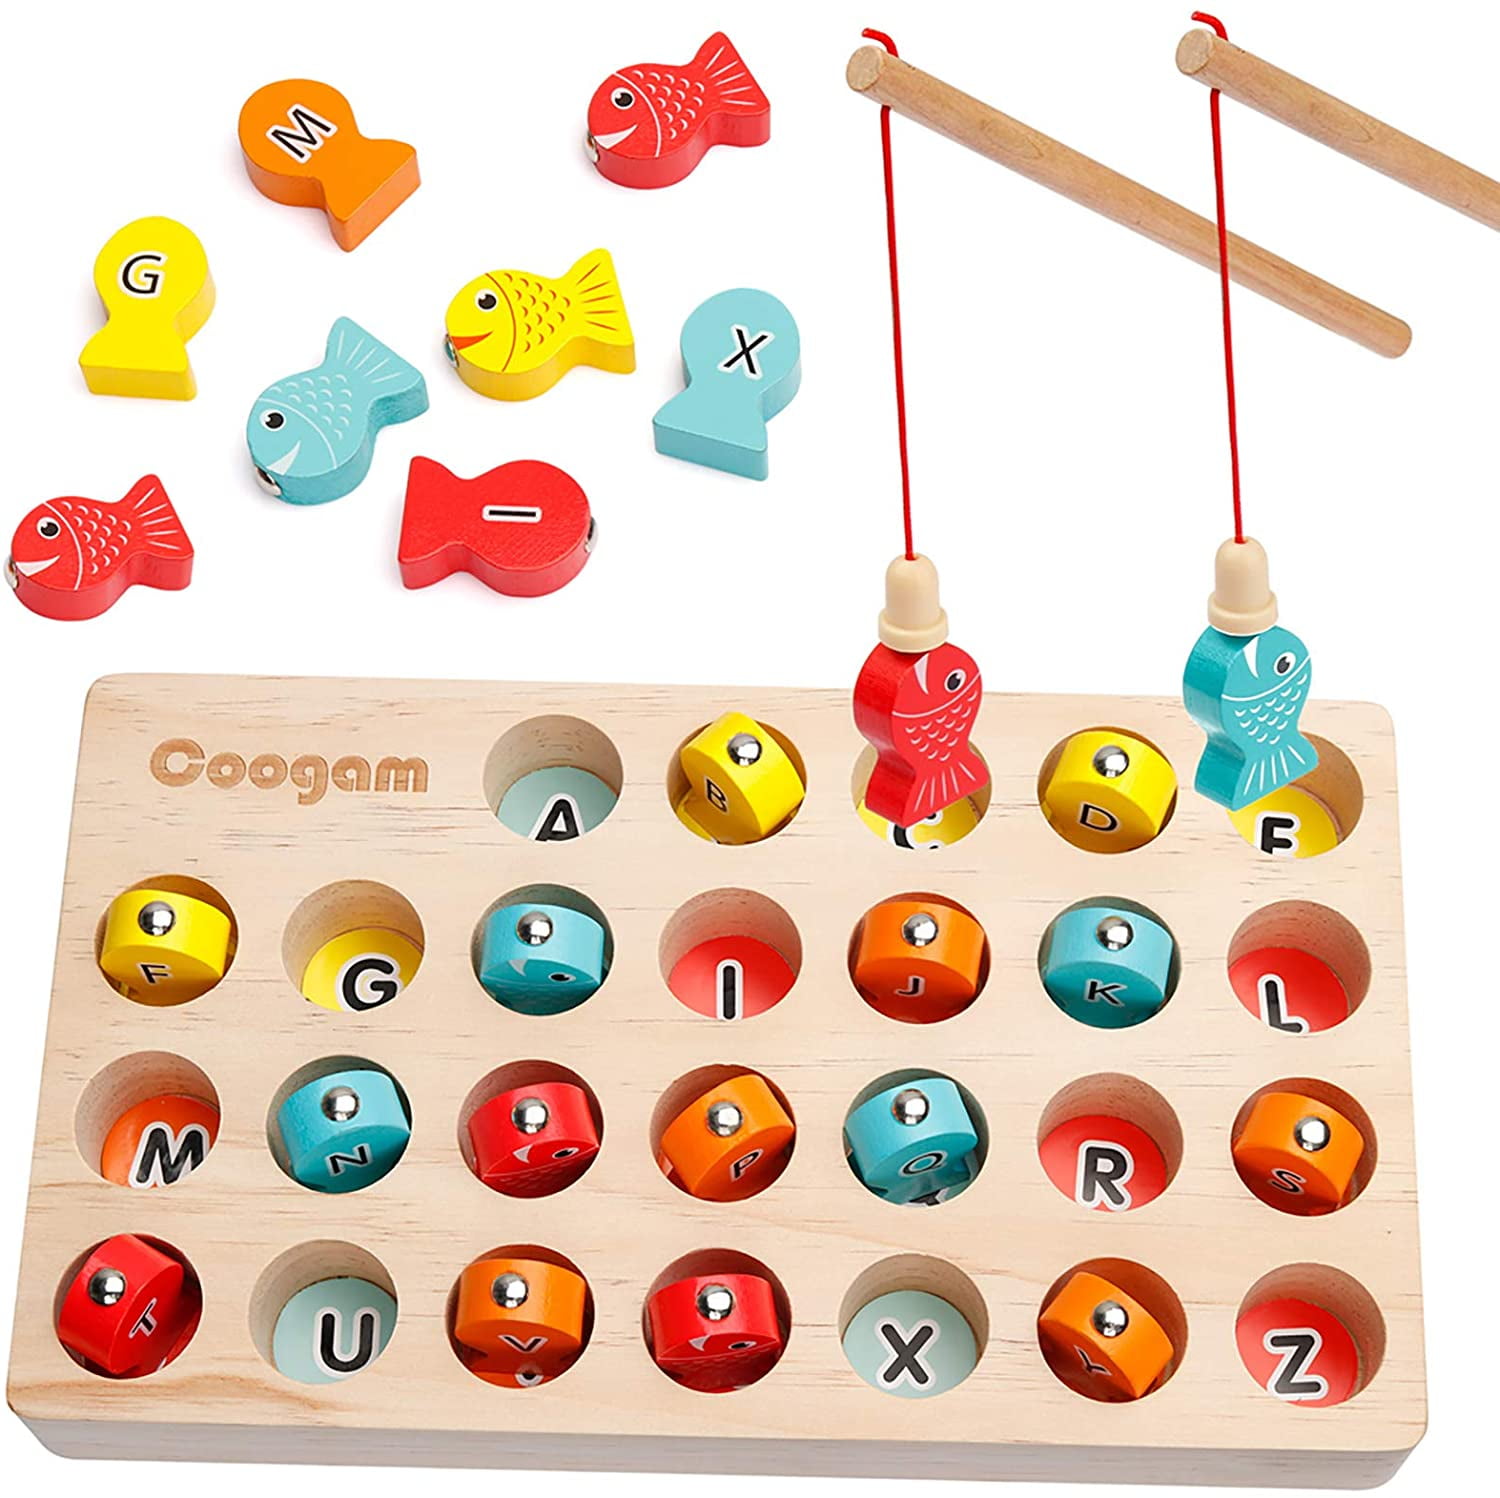 Coogam Wooden Magnetic Fishing Game, Fine Motor Skill Toy ABCD